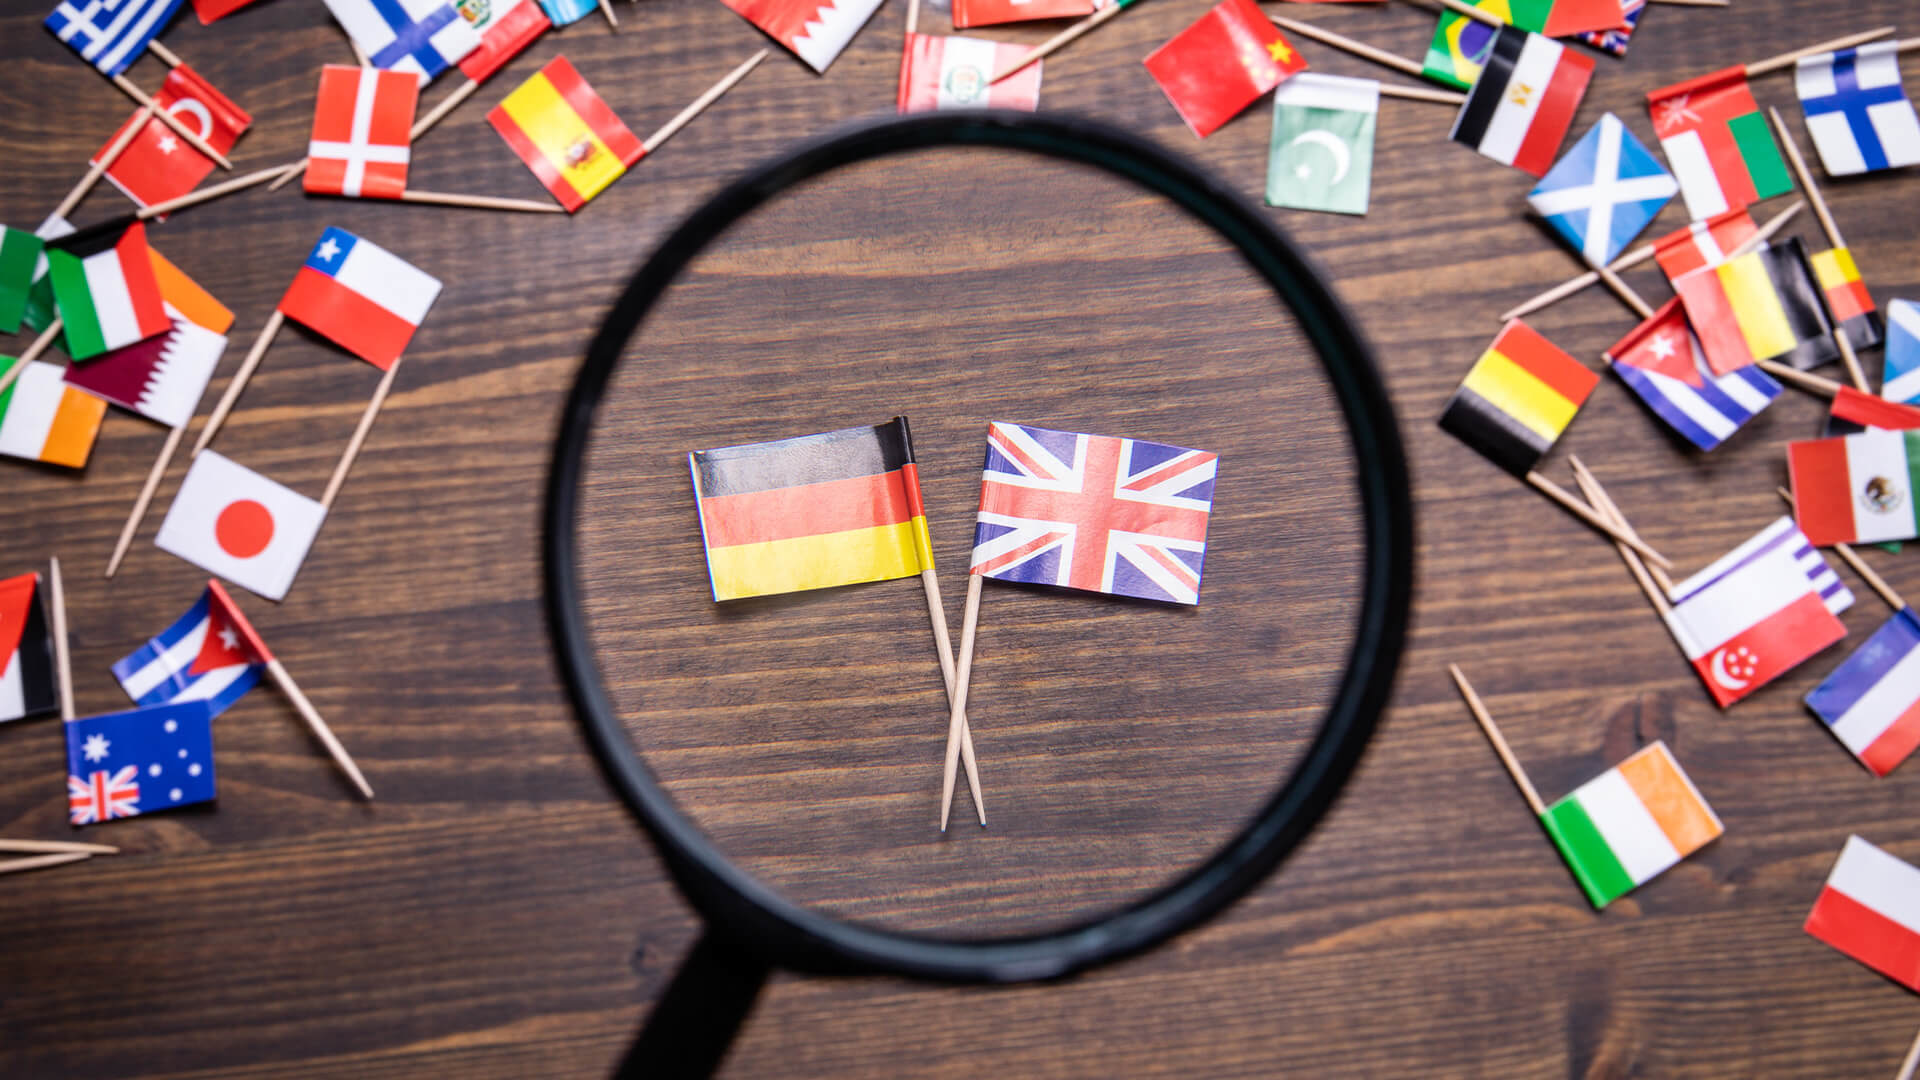 European flags on a wooden table. There is a magnifying glass over the UK and Germany flags